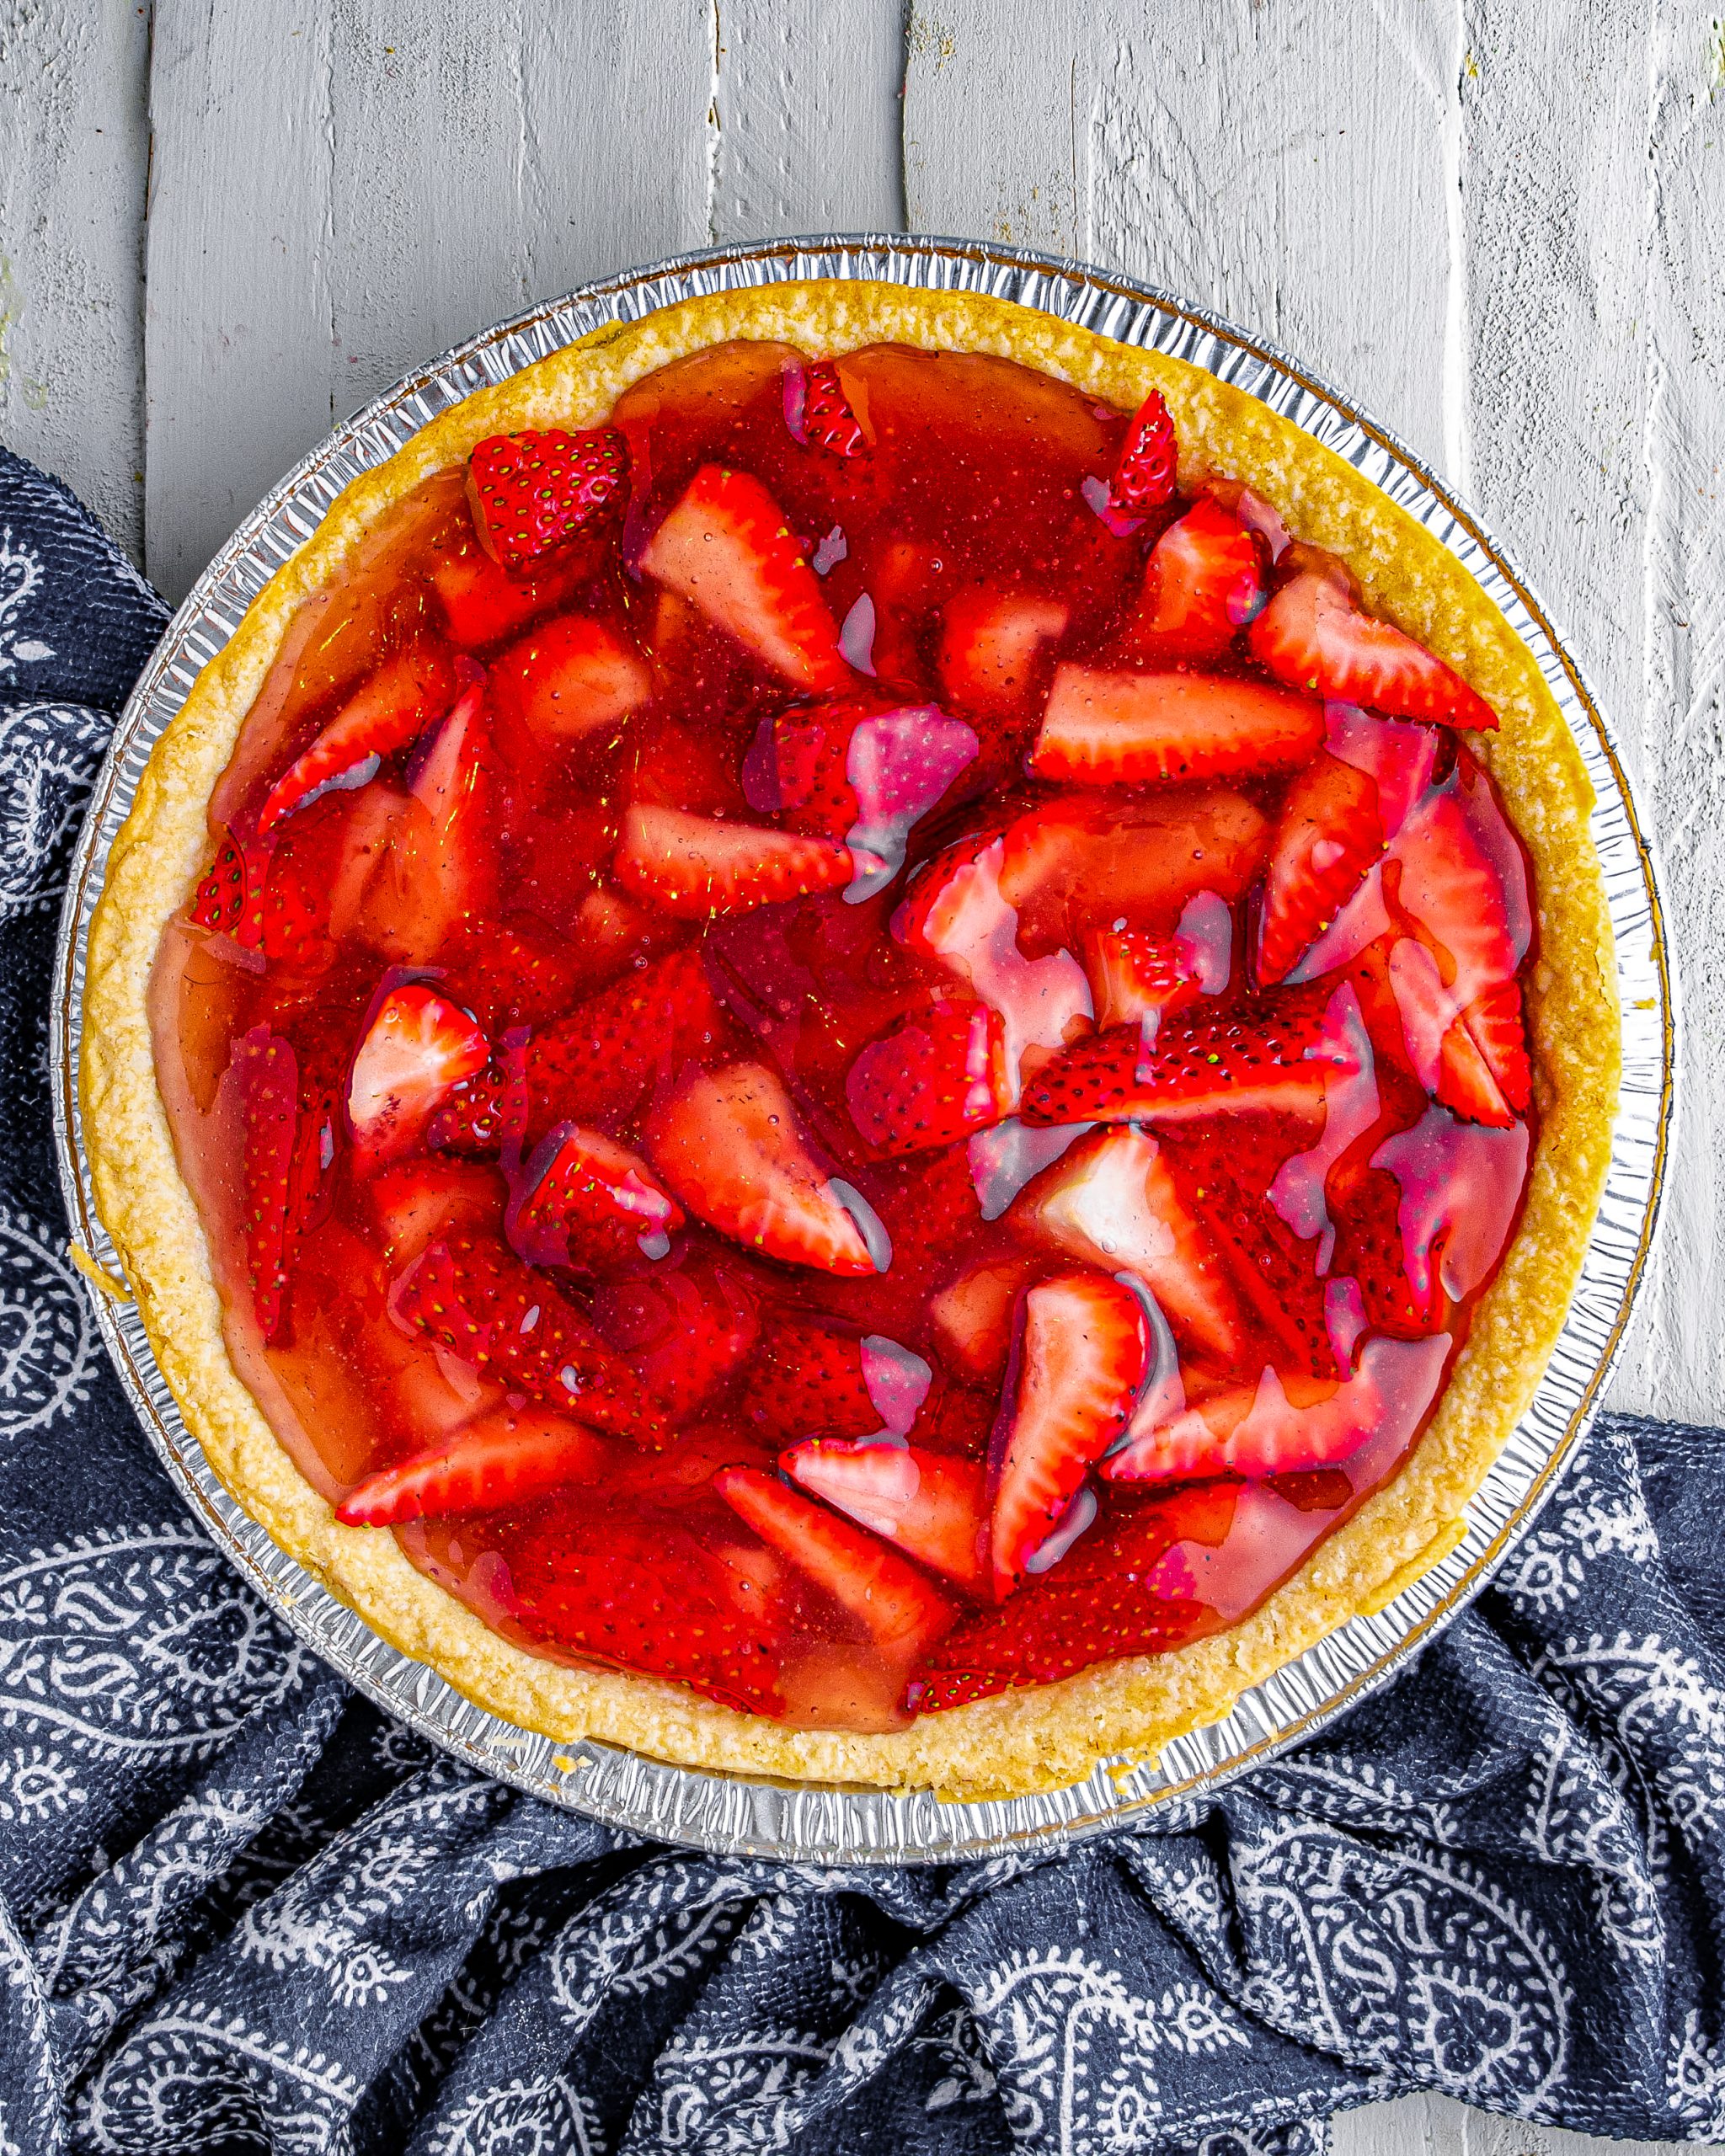 Add strawberries to the cooled pie crust, then pour over the strawberry jelly mixture.